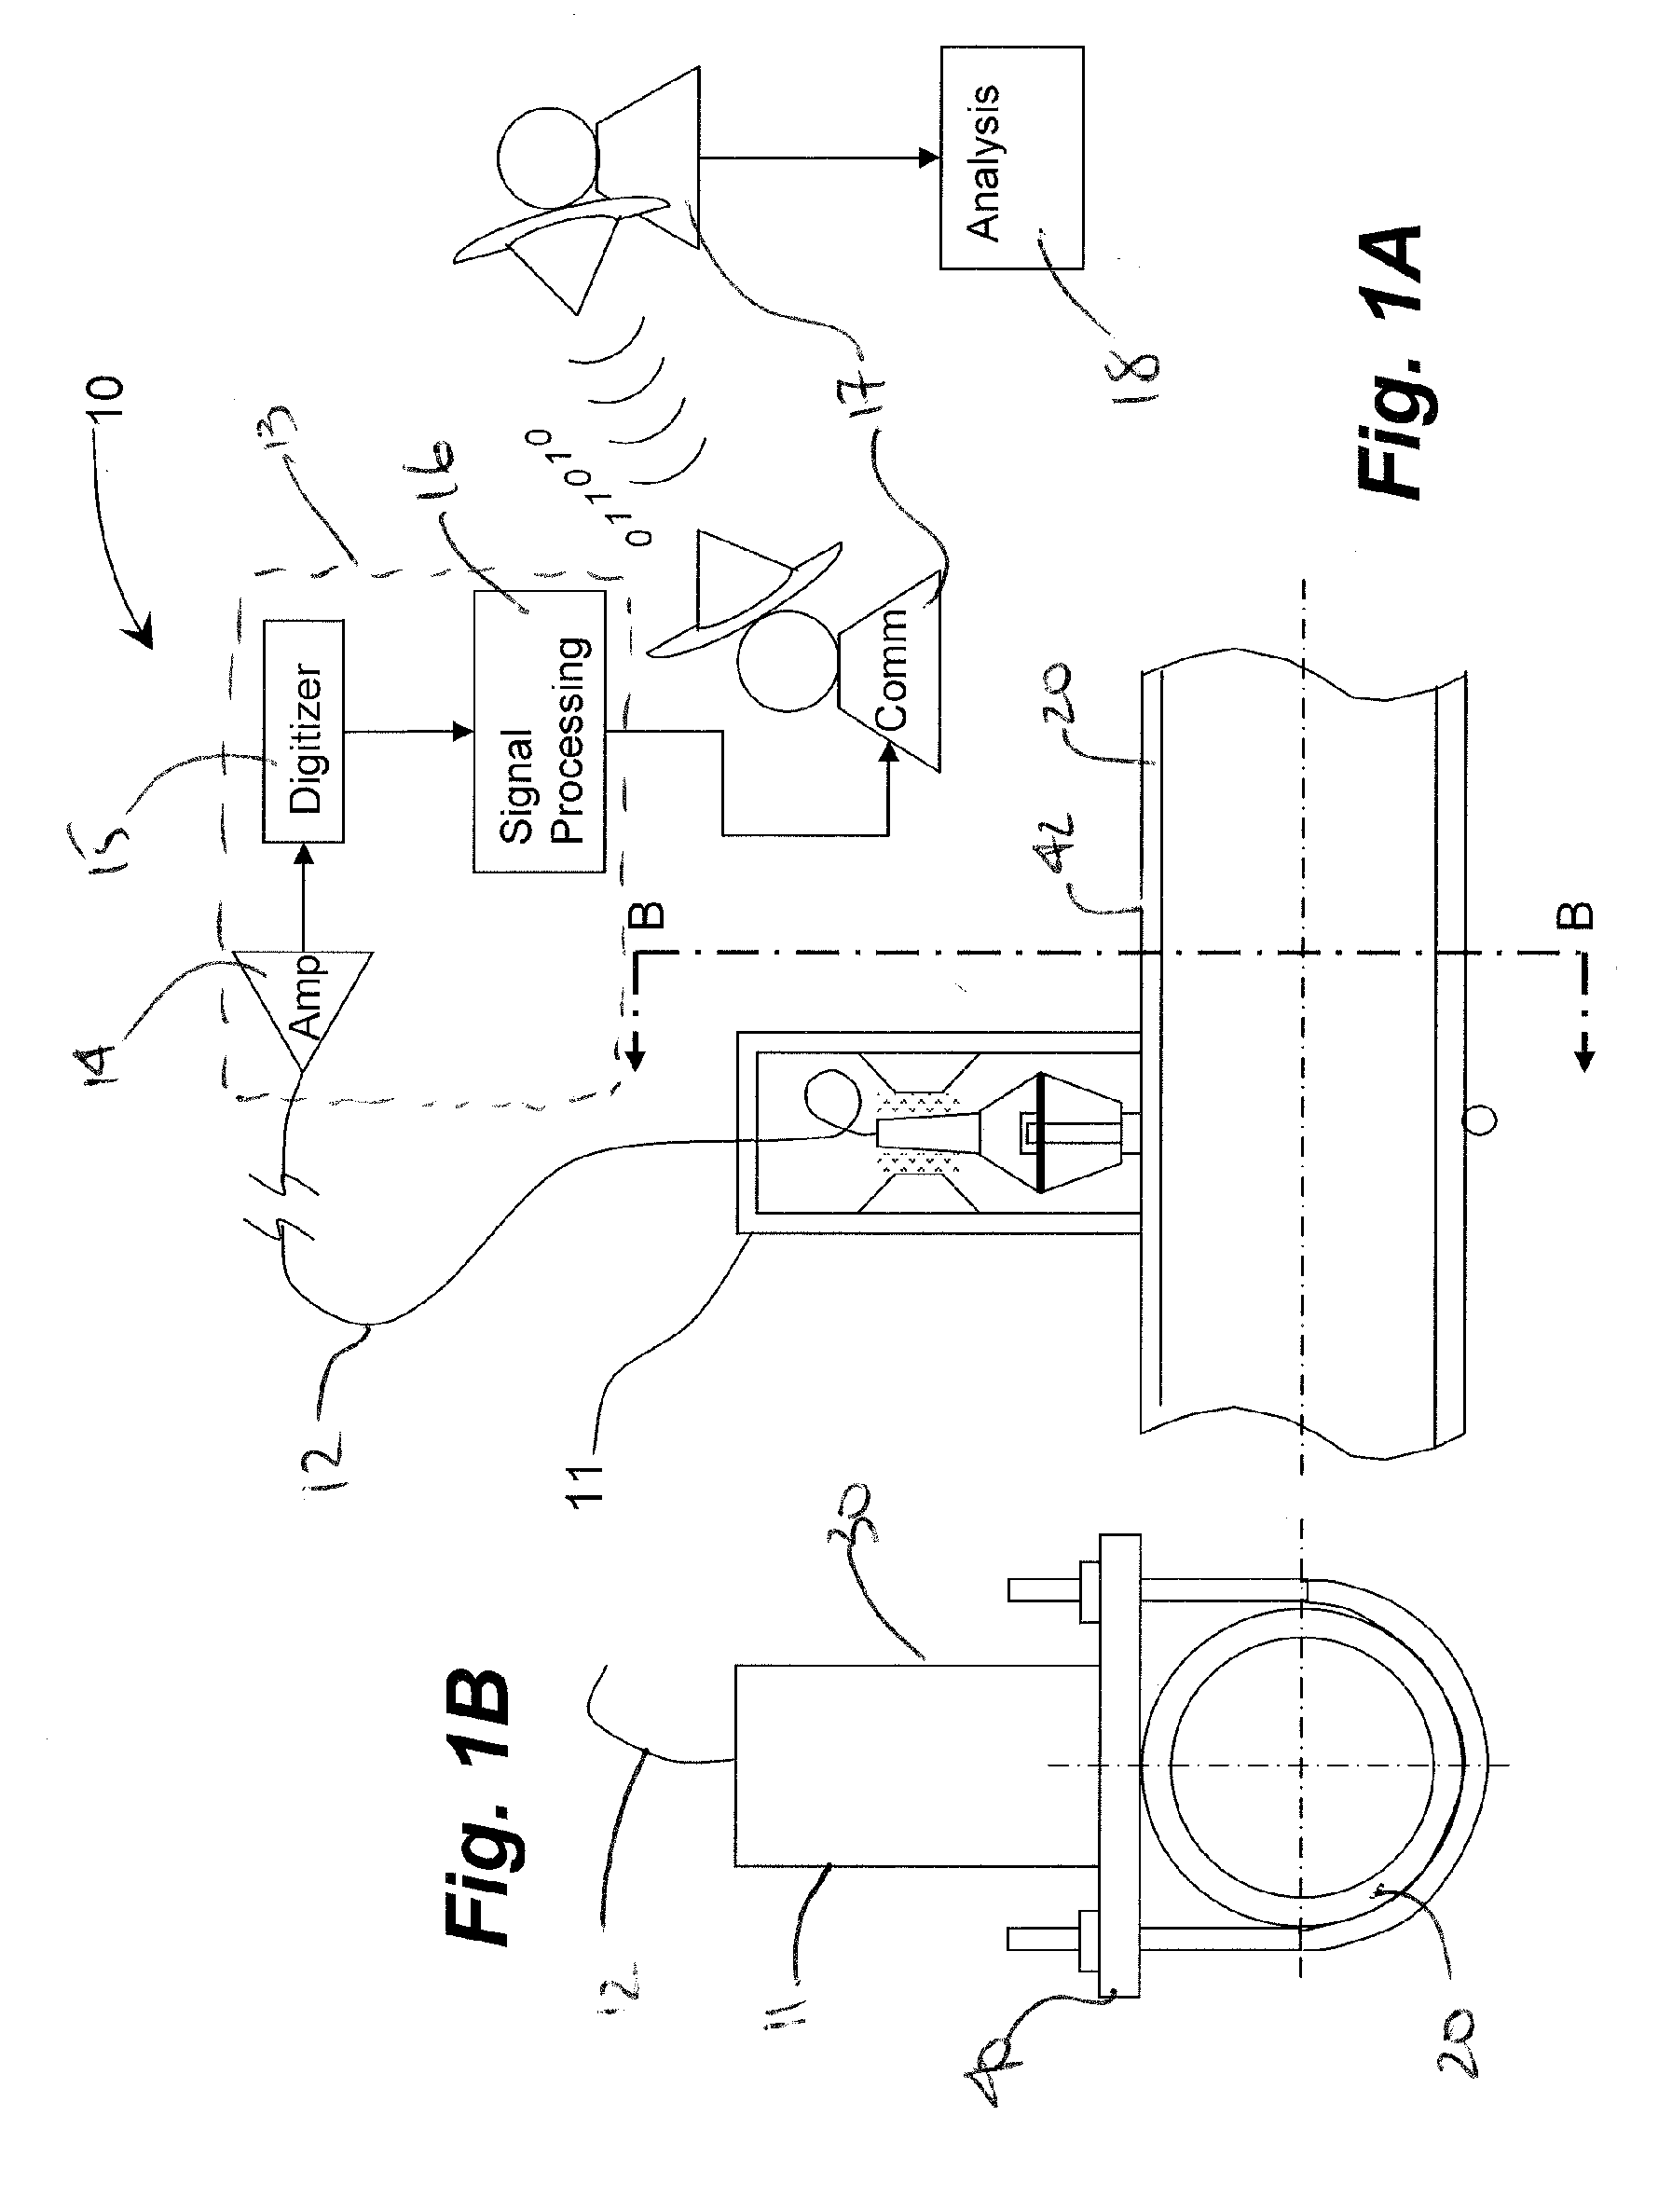 System, method and apparatus for acoustic fluid flow measurement